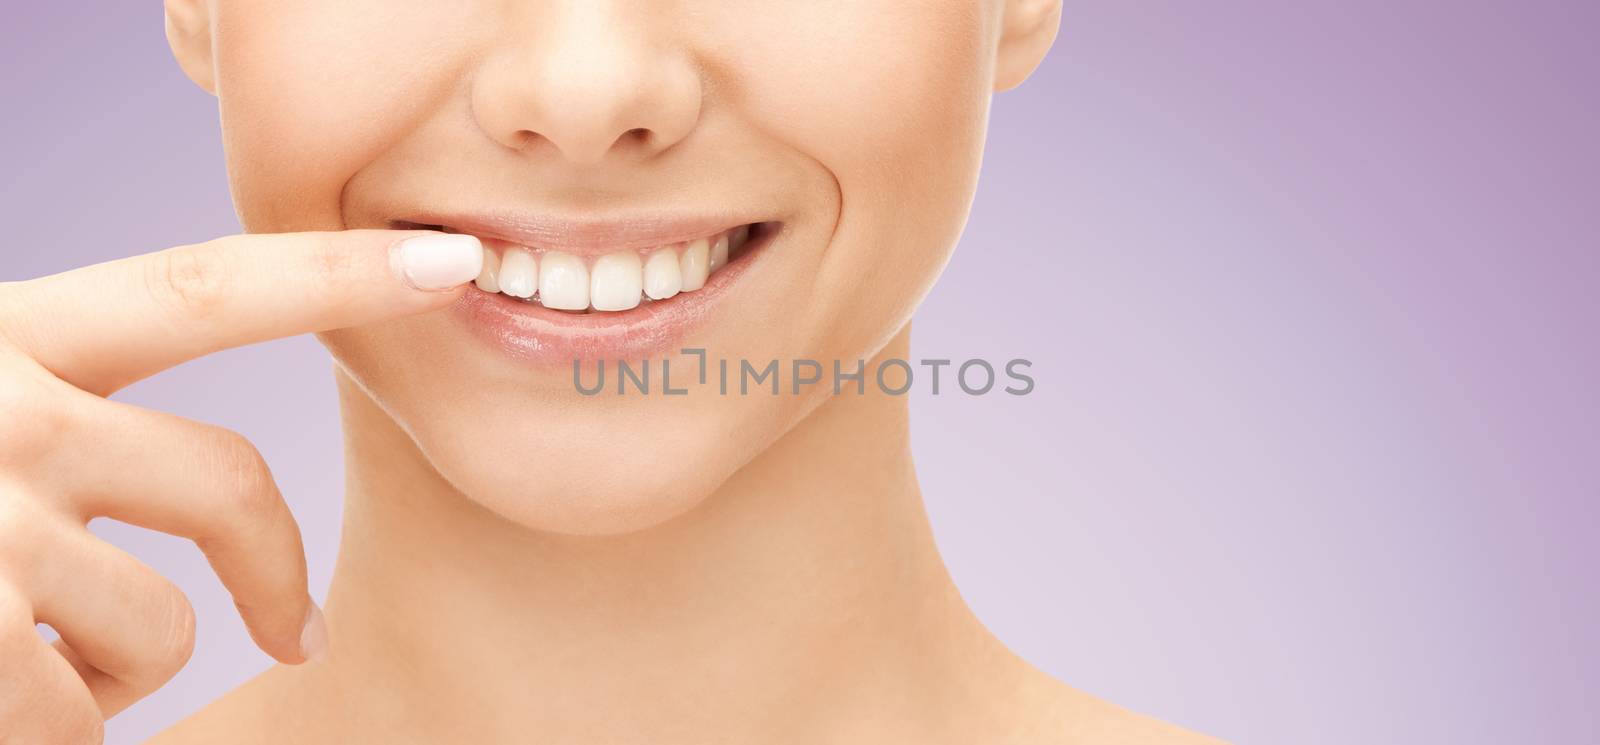 dental health, beauty, hygiene and people concept - close up of smiling woman face pointing to teeth over violet background